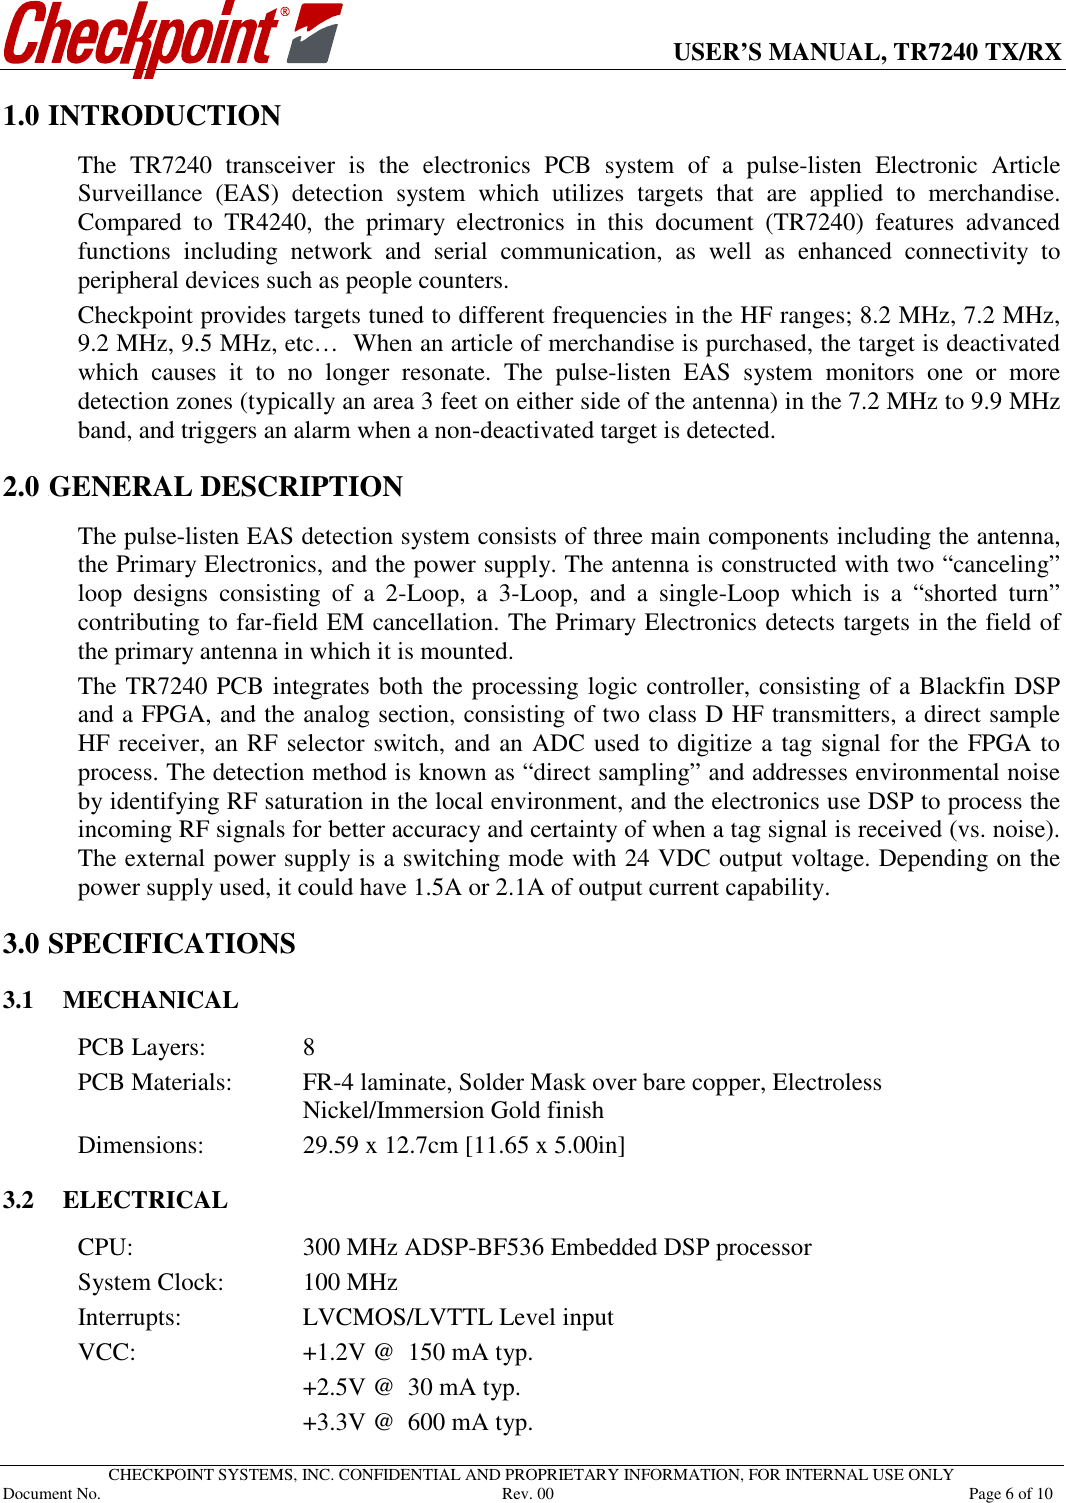      USER’S MANUAL, TR7240 TX/RX   CHECKPOINT SYSTEMS, INC. CONFIDENTIAL AND PROPRIETARY INFORMATION, FOR INTERNAL USE ONLY Document No.     Rev. 00  Page 6 of 10 1.0 INTRODUCTION The  TR7240  transceiver  is  the  electronics  PCB  system  of  a  pulse-listen  Electronic  Article Surveillance  (EAS)  detection  system  which  utilizes  targets  that  are  applied  to  merchandise. Compared  to  TR4240,  the  primary  electronics  in  this  document  (TR7240)  features  advanced functions  including  network  and  serial  communication,  as  well  as  enhanced  connectivity  to peripheral devices such as people counters.   Checkpoint provides targets tuned to different frequencies in the HF ranges; 8.2 MHz, 7.2 MHz, 9.2 MHz, 9.5 MHz, etc…  When an article of merchandise is purchased, the target is deactivated which  causes  it  to  no  longer  resonate.  The  pulse-listen  EAS  system  monitors  one  or  more detection zones (typically an area 3 feet on either side of the antenna) in the 7.2 MHz to 9.9 MHz band, and triggers an alarm when a non-deactivated target is detected. 2.0 1GENERAL DESCRIPTION The pulse-listen EAS detection system consists of three main components including the antenna, the Primary Electronics, and the power supply. The antenna is constructed with two “canceling” loop  designs  consisting  of  a  2-Loop,  a  3-Loop,  and  a  single-Loop  which  is  a  “shorted  turn” contributing to far-field EM cancellation. The Primary Electronics detects targets in the field of the primary antenna in which it is mounted. The TR7240 PCB integrates both the processing logic controller, consisting of a Blackfin DSP and a FPGA, and the analog section, consisting of two class D HF transmitters, a direct sample HF receiver, an RF selector switch, and an ADC used to digitize a tag signal for the FPGA to process. The detection method is known as “direct sampling” and addresses environmental noise by identifying RF saturation in the local environment, and the electronics use DSP to process the incoming RF signals for better accuracy and certainty of when a tag signal is received (vs. noise). The external power supply is a switching mode with 24 VDC output voltage. Depending on the power supply used, it could have 1.5A or 2.1A of output current capability. 3.0 SPECIFICATIONS 3.1 MECHANICAL PCB Layers:    8 PCB Materials:   FR-4 laminate, Solder Mask over bare copper, Electroless Nickel/Immersion Gold finish Dimensions:    29.59 x 12.7cm [11.65 x 5.00in]  3.2 ELECTRICAL CPU:      300 MHz ADSP-BF536 Embedded DSP processor System Clock:   100 MHz Interrupts:    LVCMOS/LVTTL Level input VCC:      +1.2V @  150 mA typ.       +2.5V @  30 mA typ.       +3.3V @  600 mA typ. 